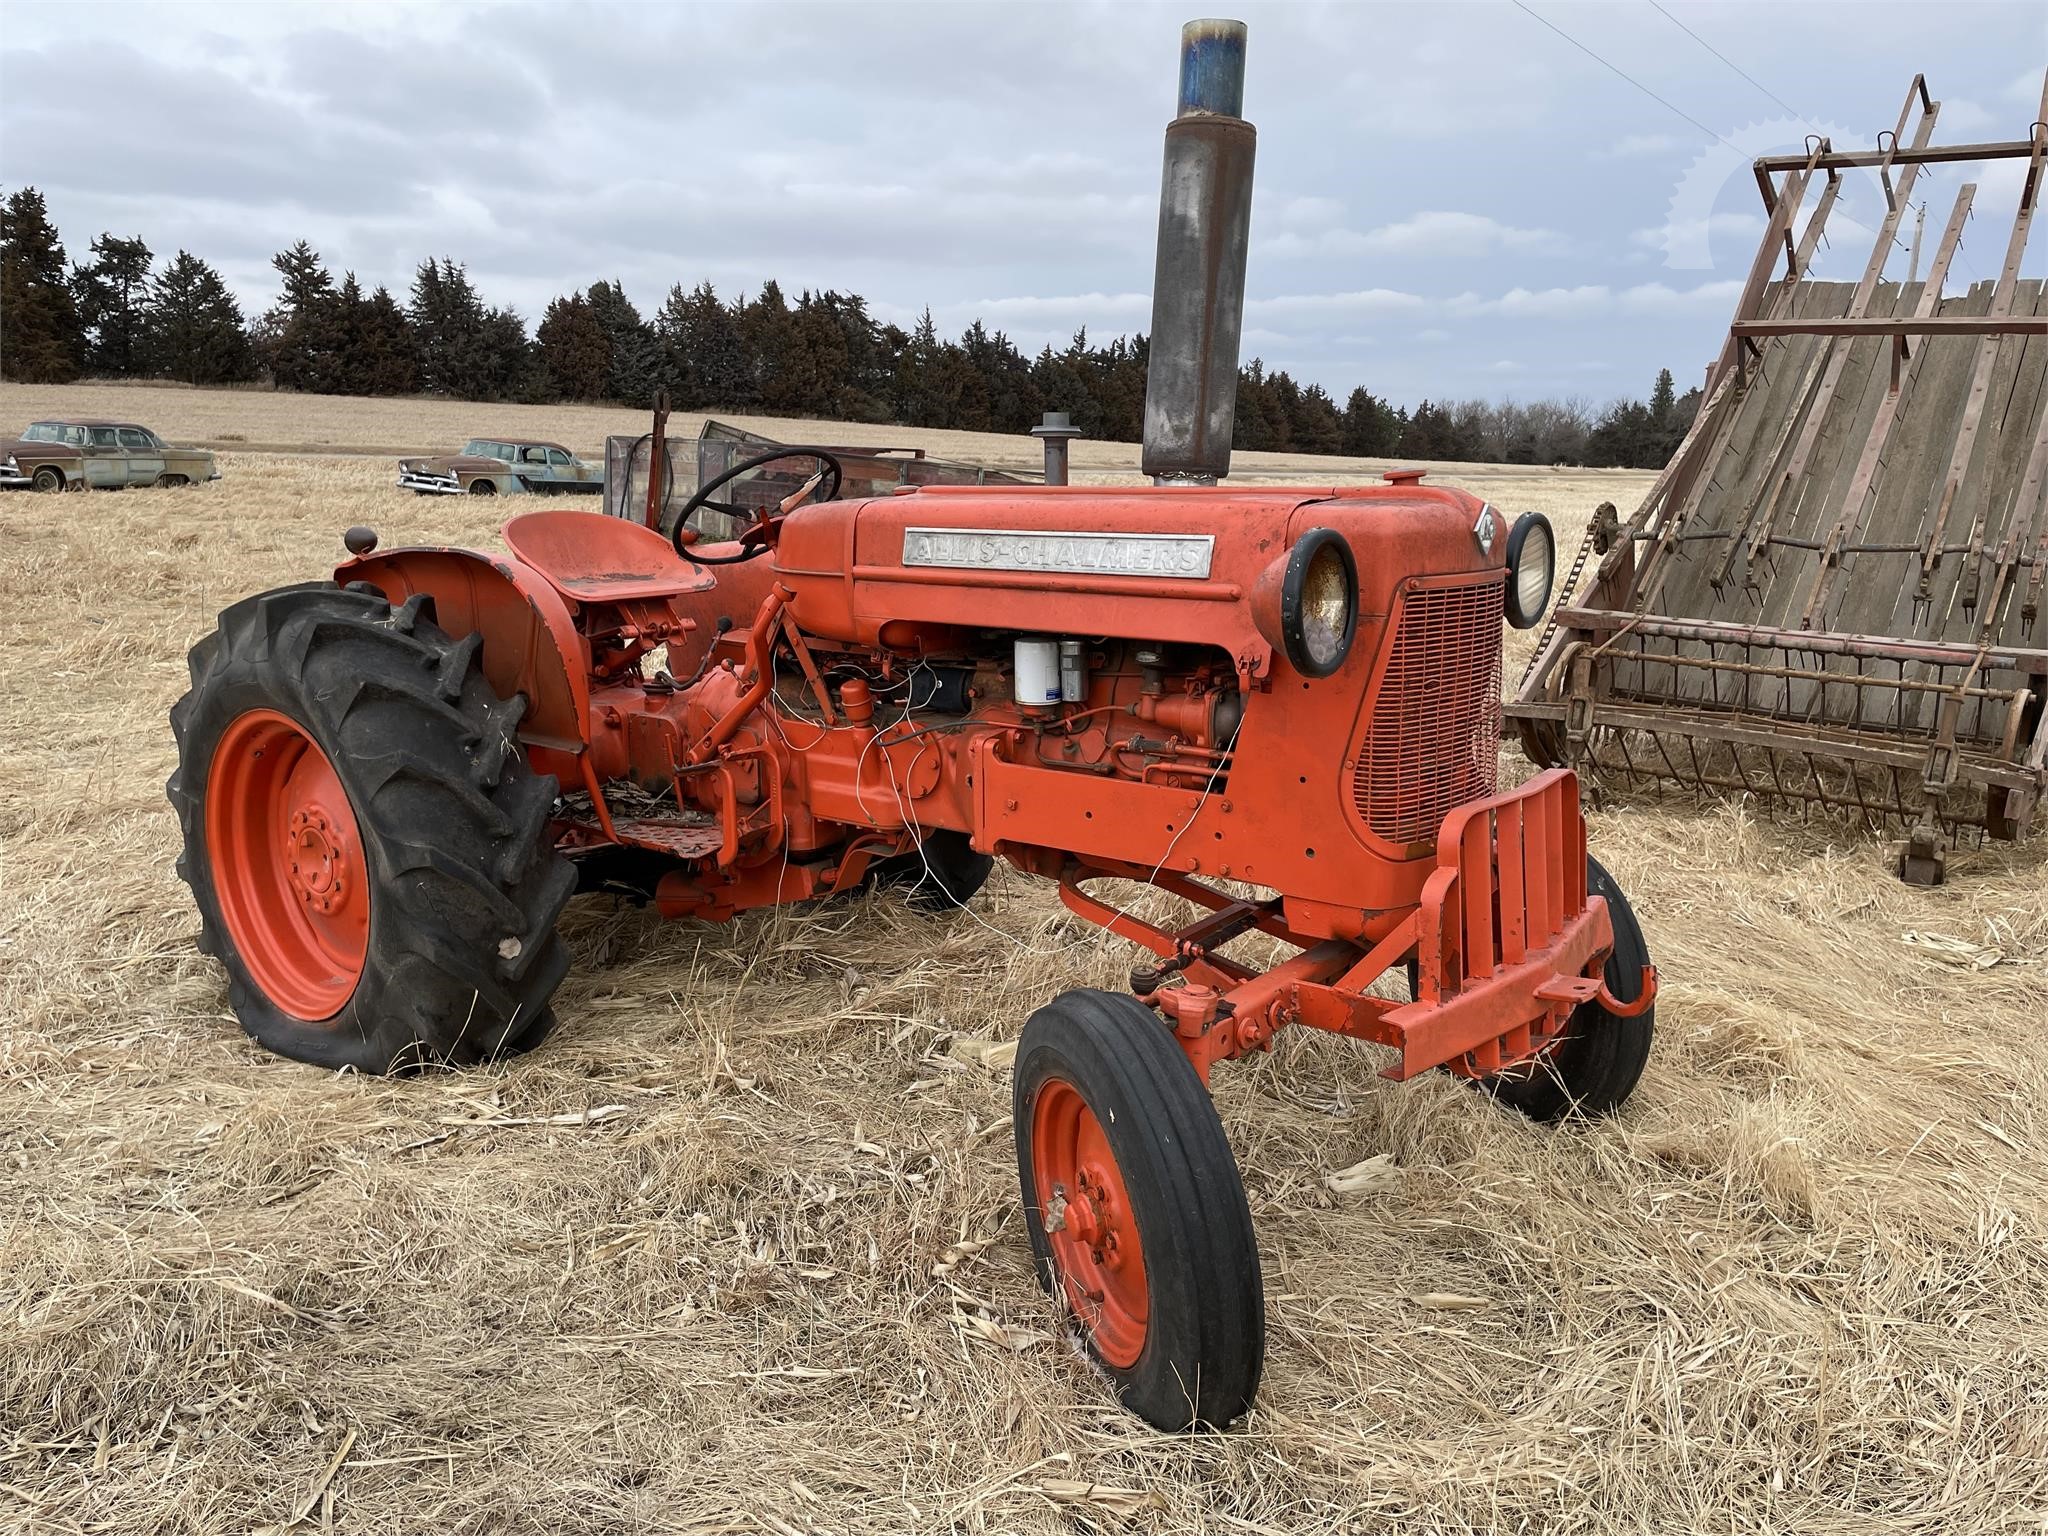 Allis Chalmers D15 Tractor 1989 Minnesota State Fair Made in USA SEPC Cast 1/16 for sale online 